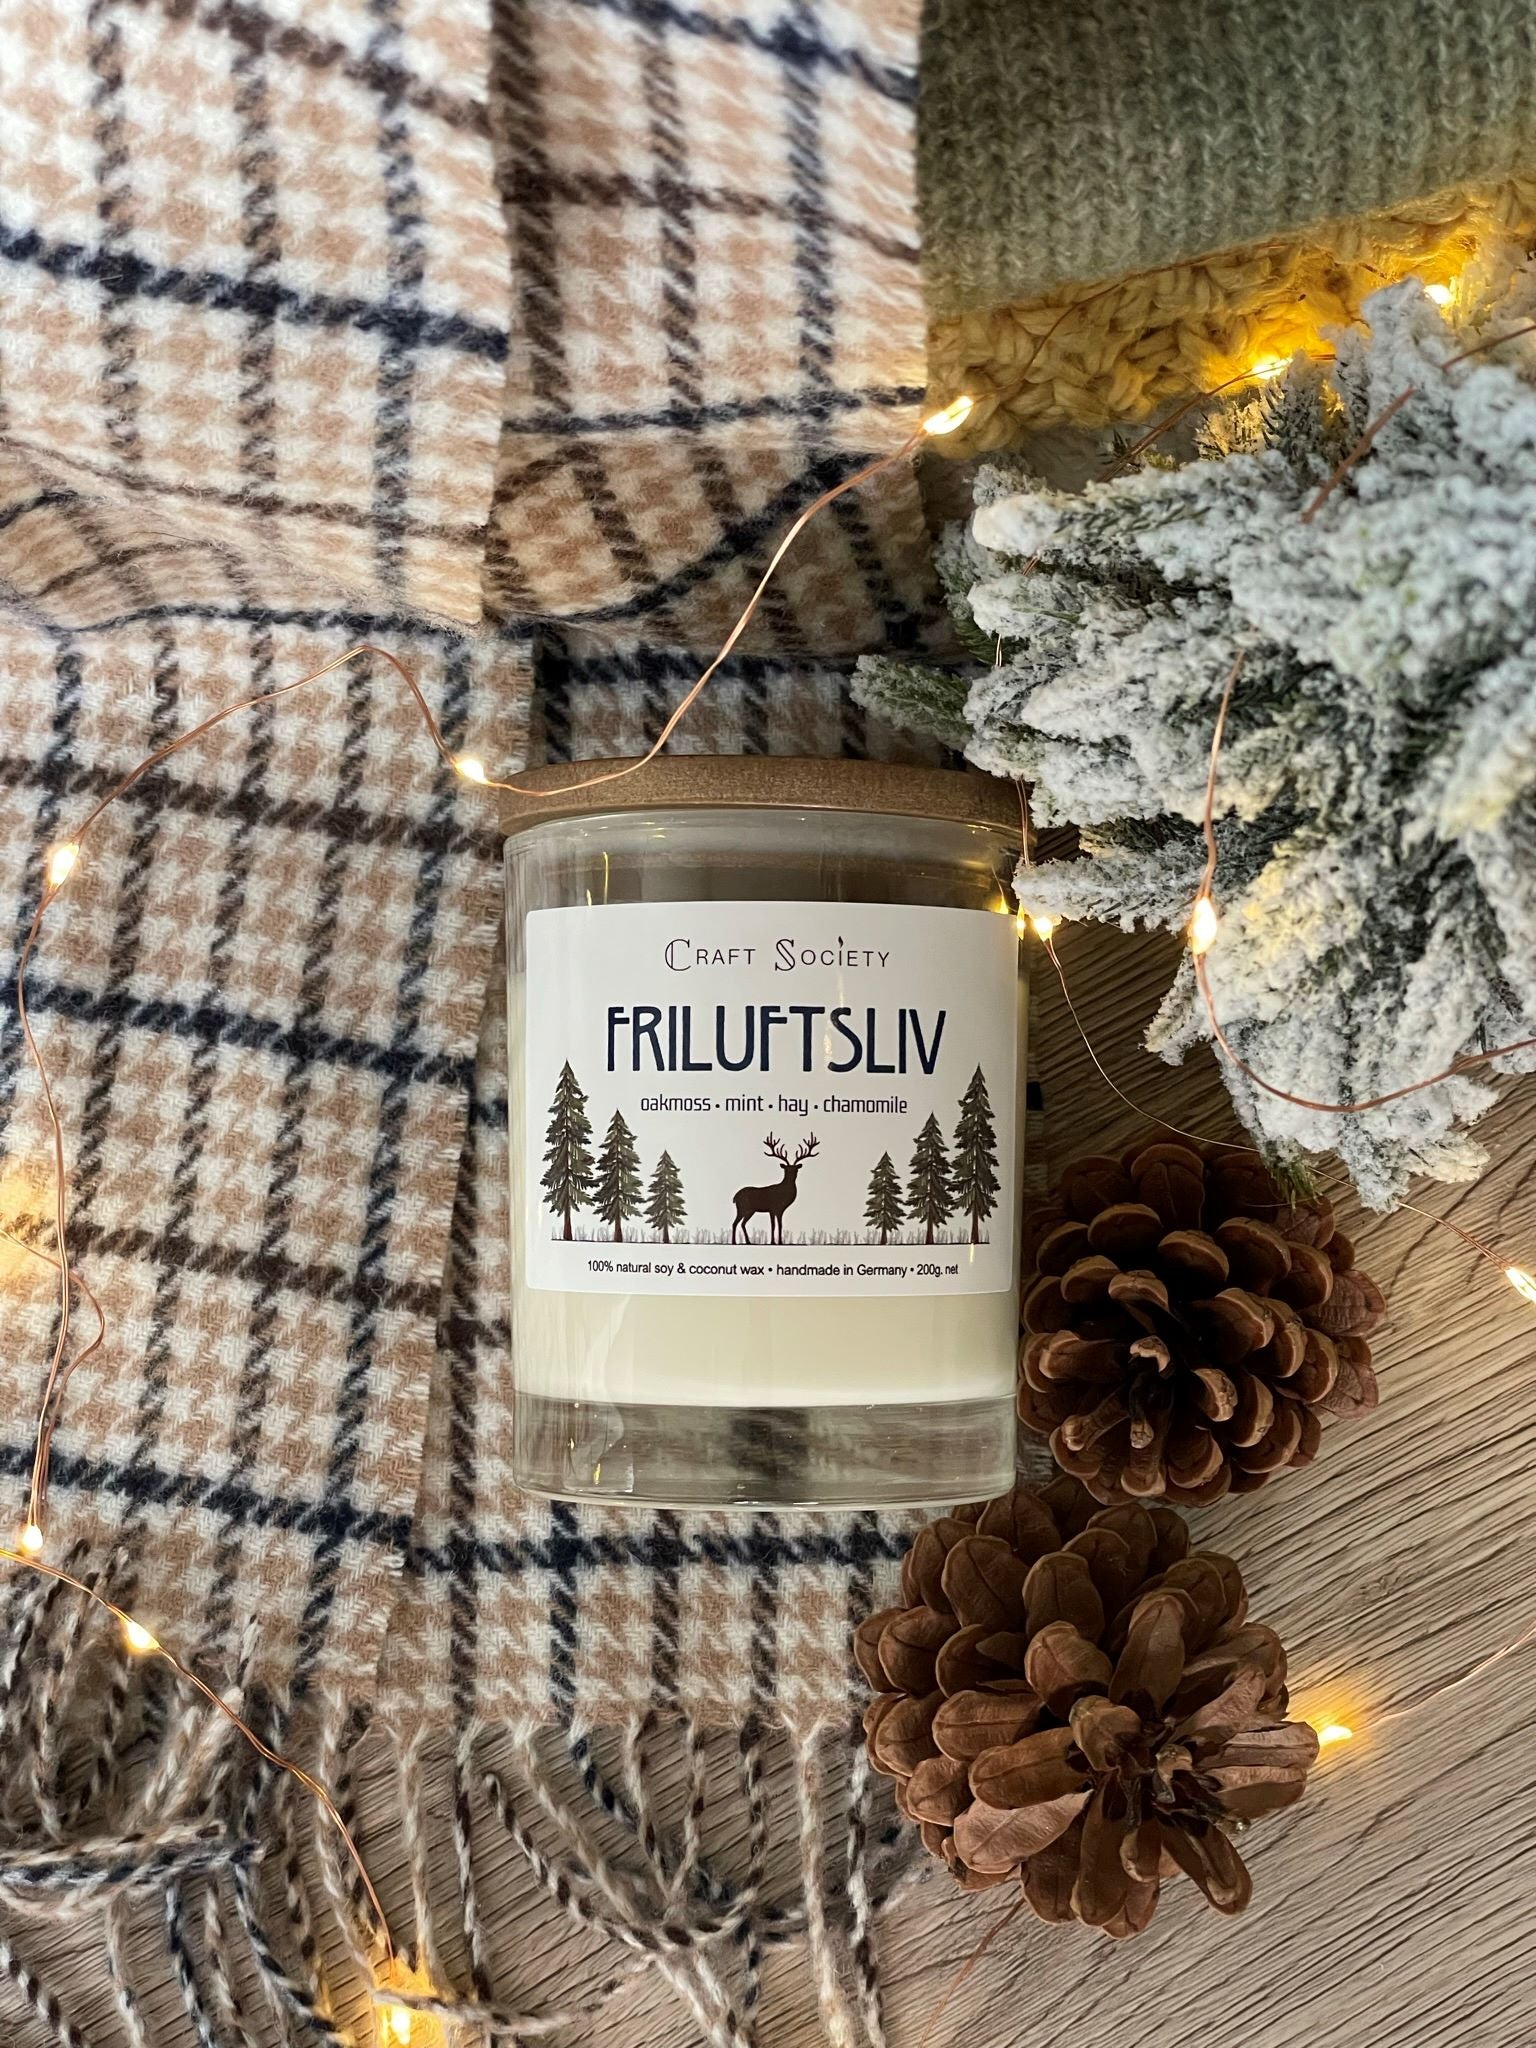 The Friluftsliv scented candle with cotton wick from above on a festive background